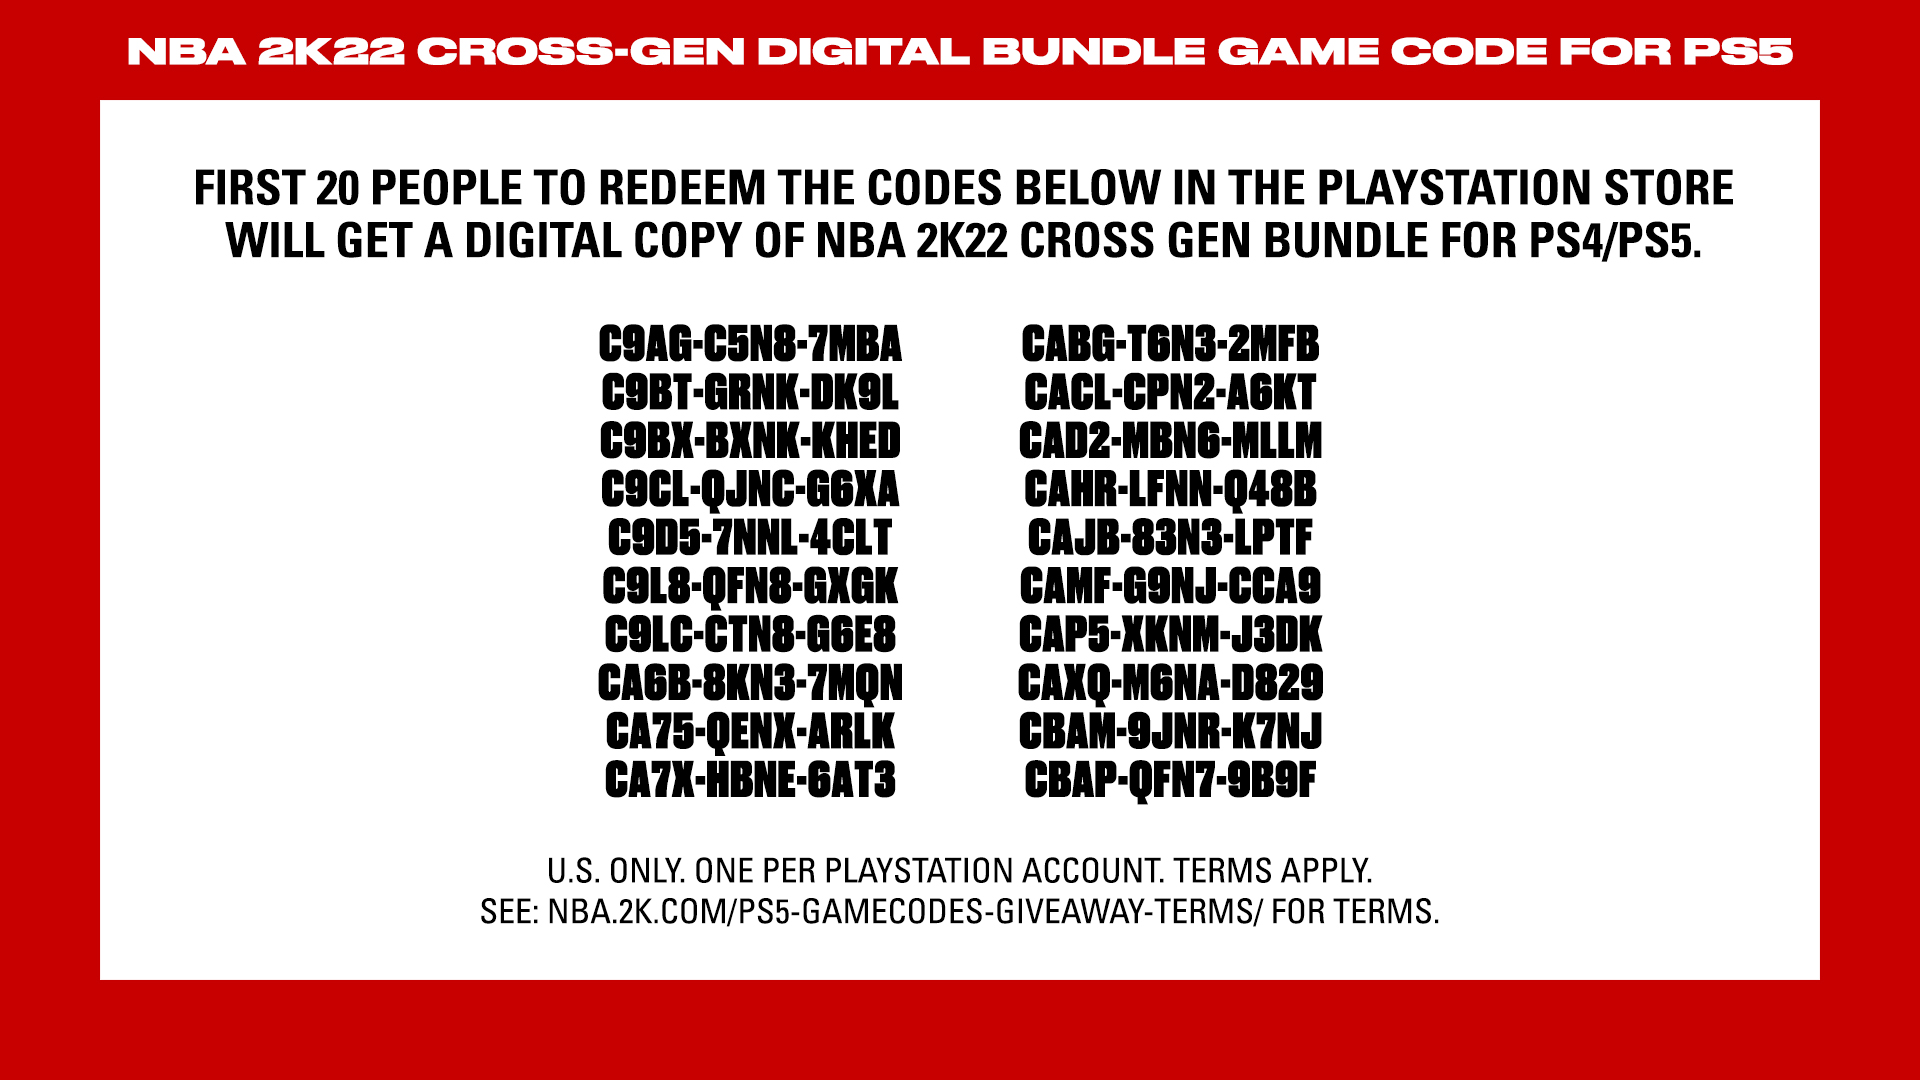 NBA 2K on "🎮 NBA 2K22 Game Codes for @PlayStation US only. One per PlayStation Account. Terms See terms: https://t.co/SYMtTIURuE https://t.co/cOZFecifZH" /